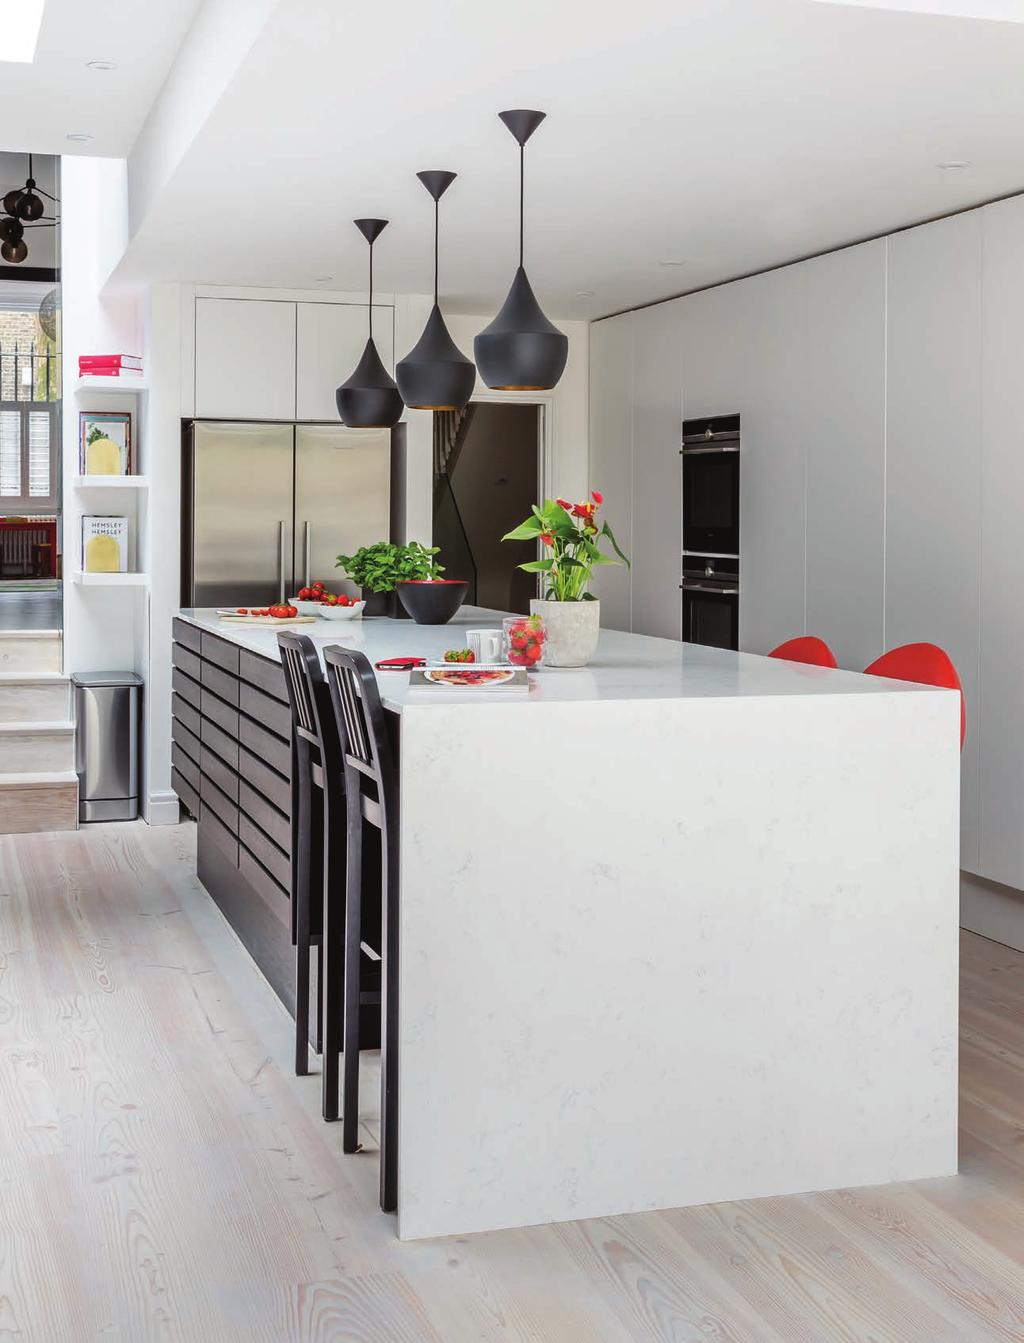 The Multiform Form 1 island is the centre piece of this room. Dramatically contrasting against the crisp white cabinetry and light, bright surroundings, the island features black stained oak doors.